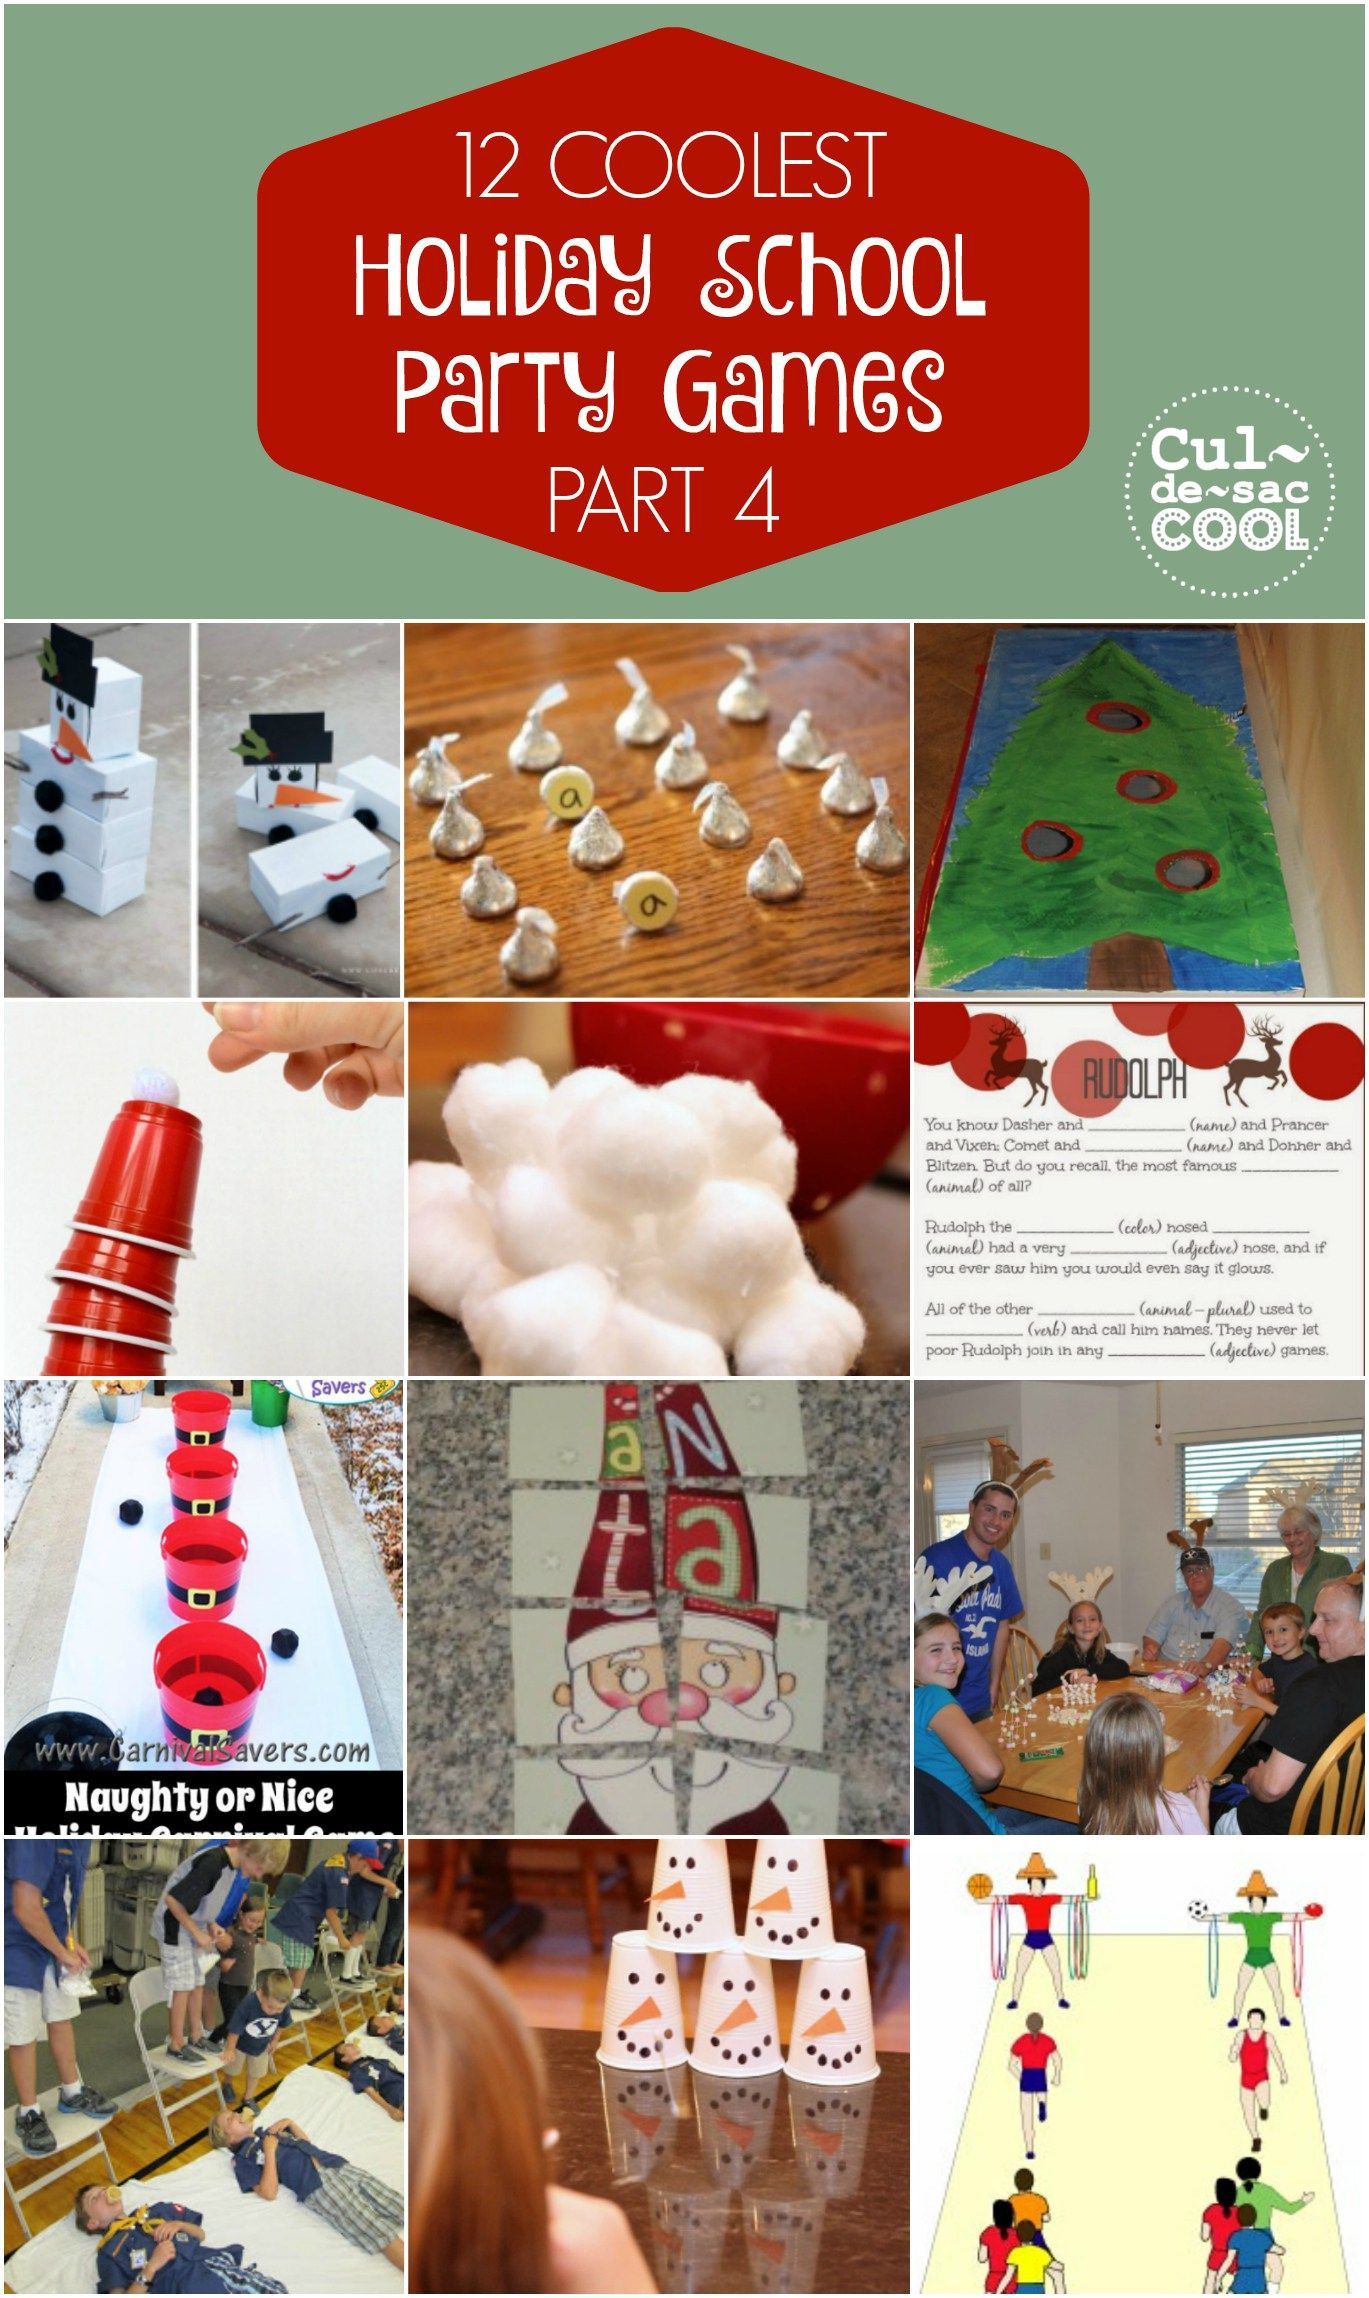 2Nd Grade Holiday Party Ideas
 12 Coolest Holiday School Party Games Part 4Collage